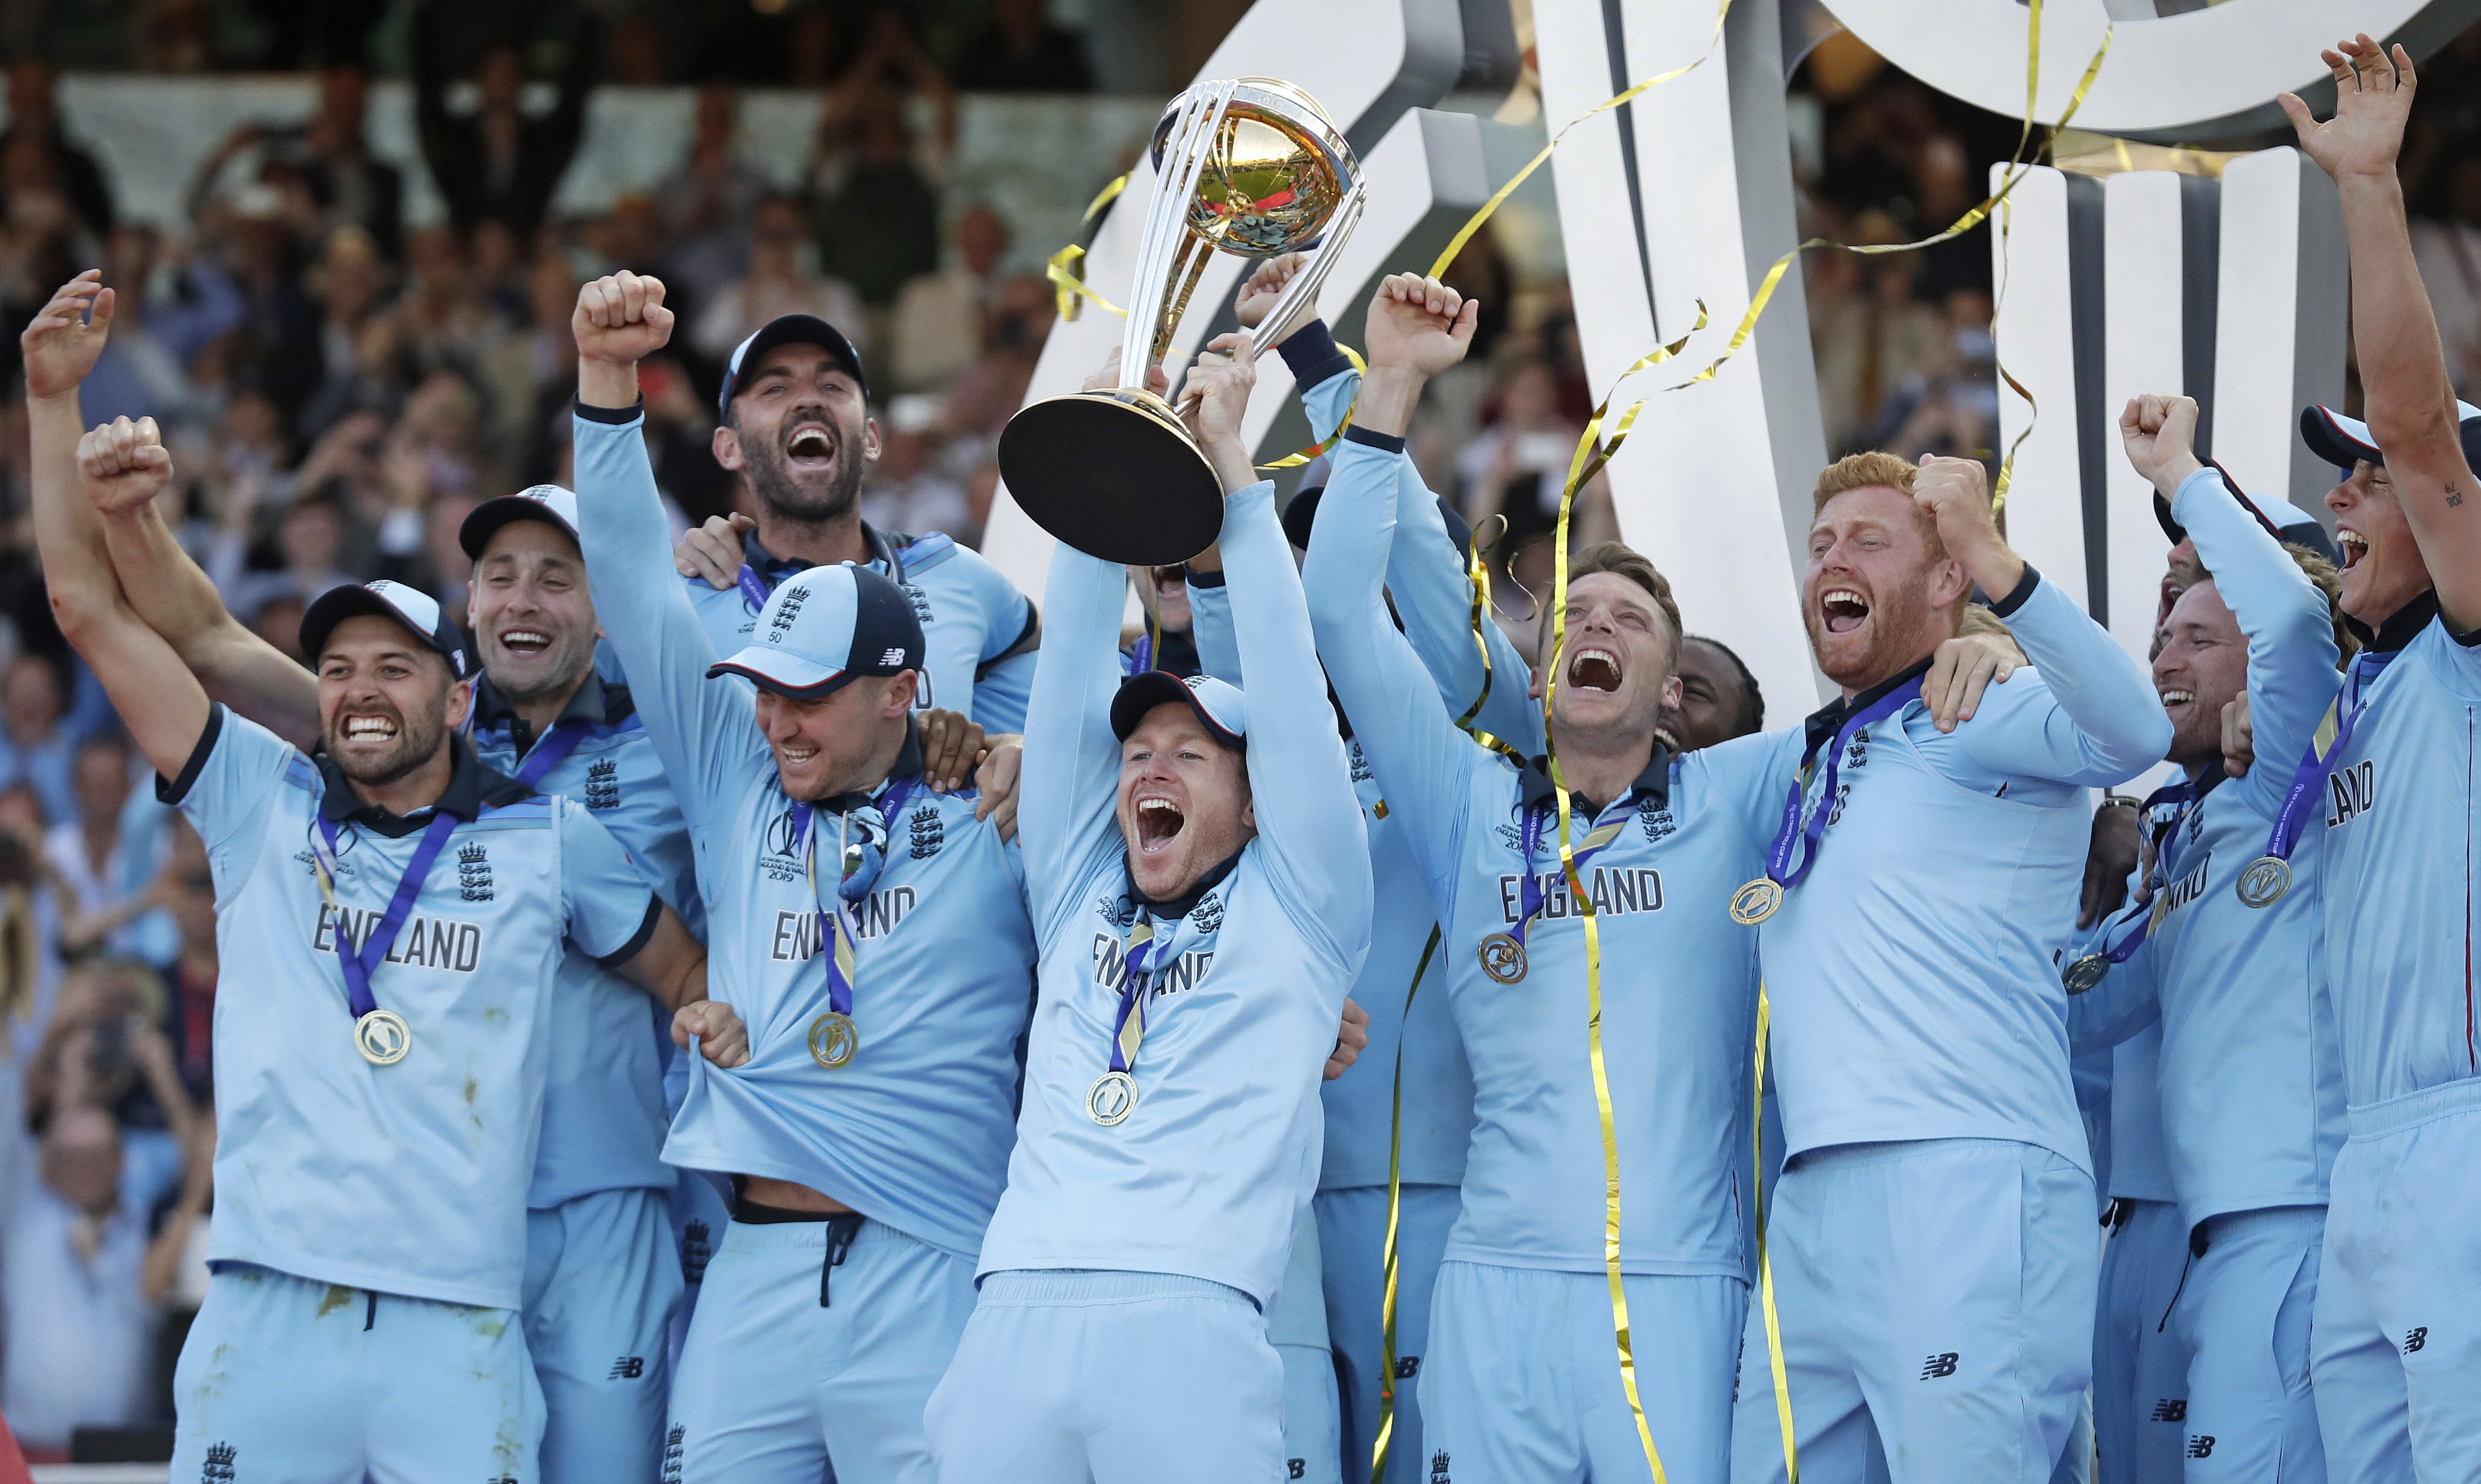 Cricket World Cup on Sky Sports: Umpires and match referees, Cricket News